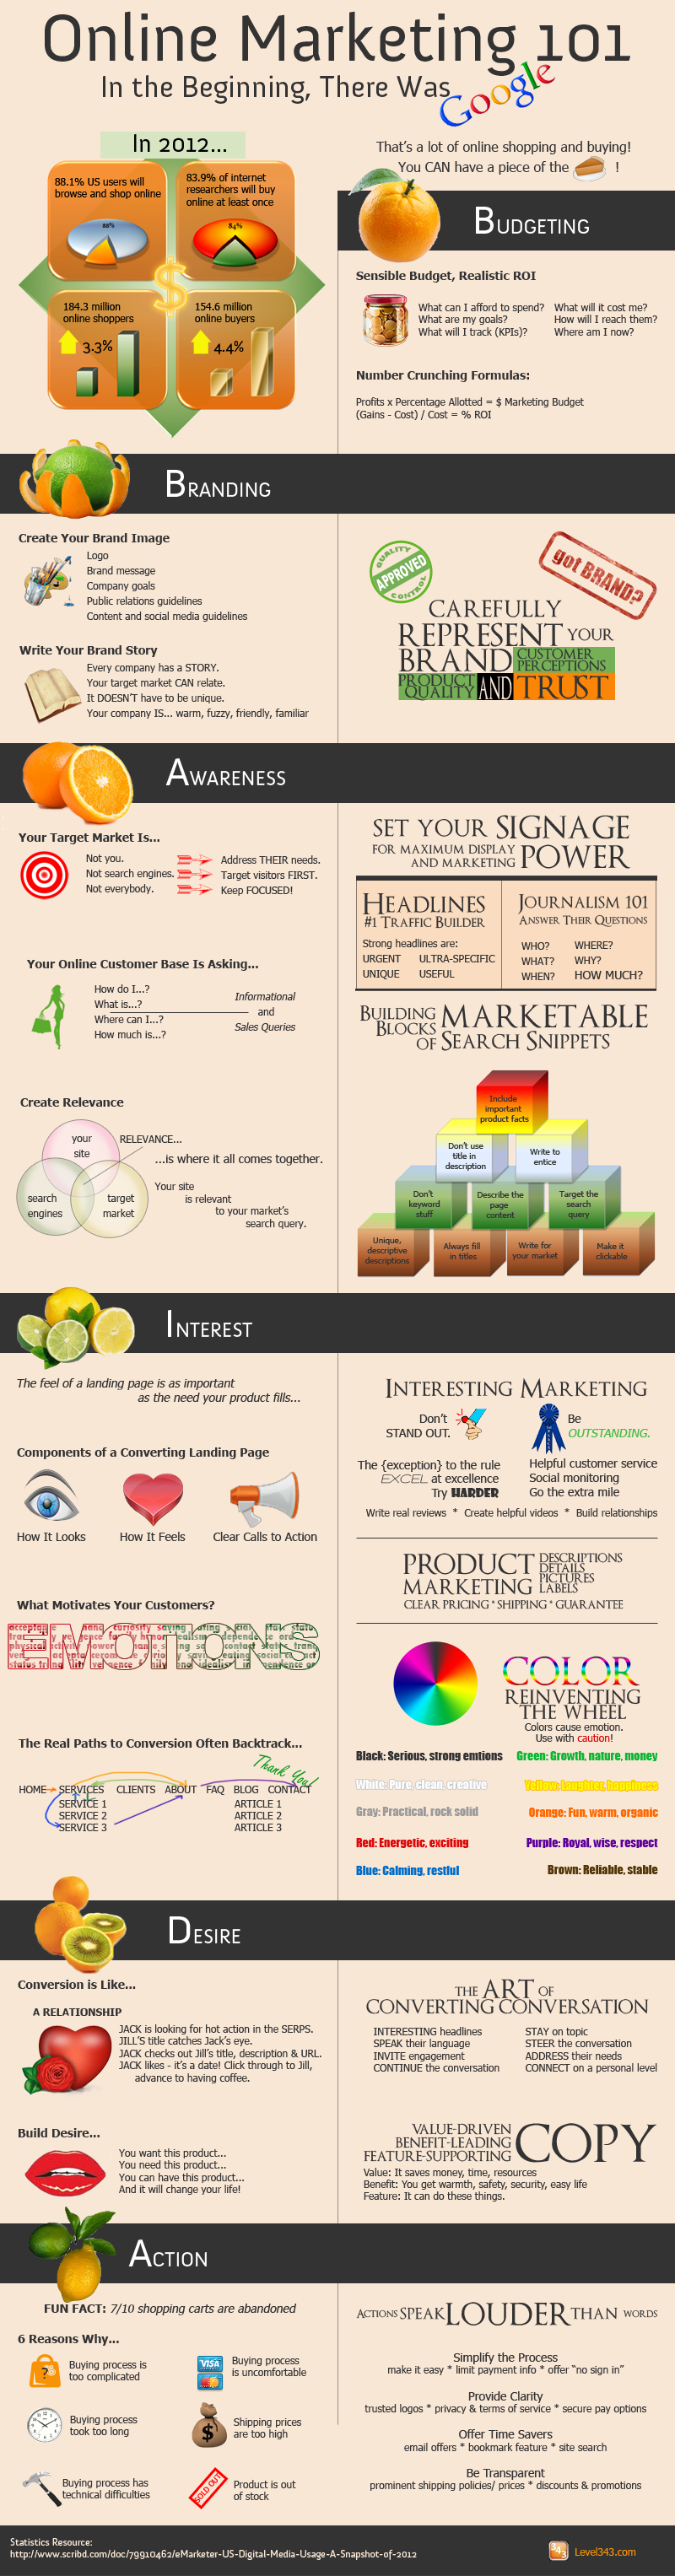 101-Online-Marketing-Tips-and-Strategies-from-Google-Infographic